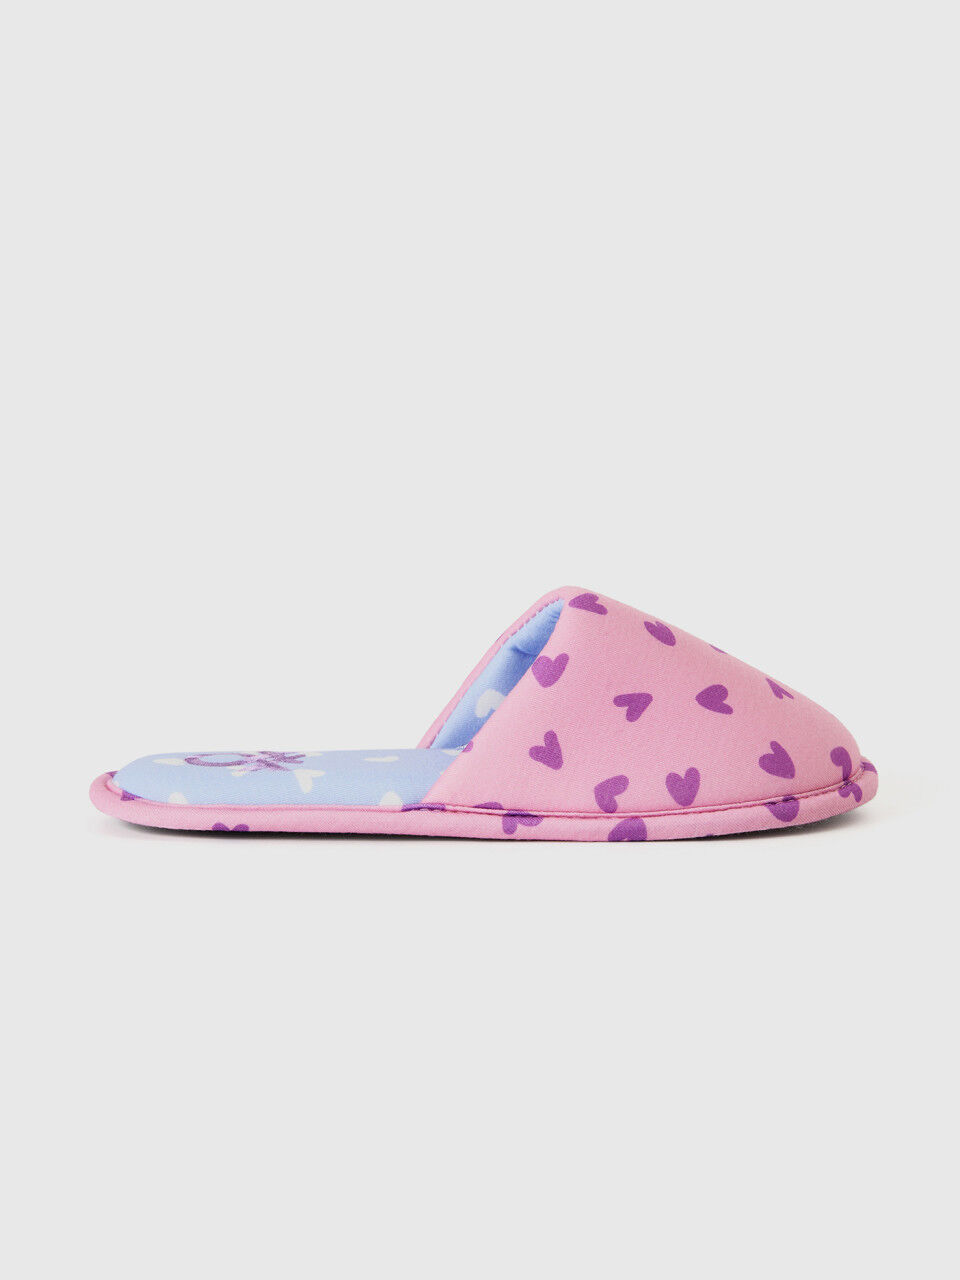 Heart-patterned slippers